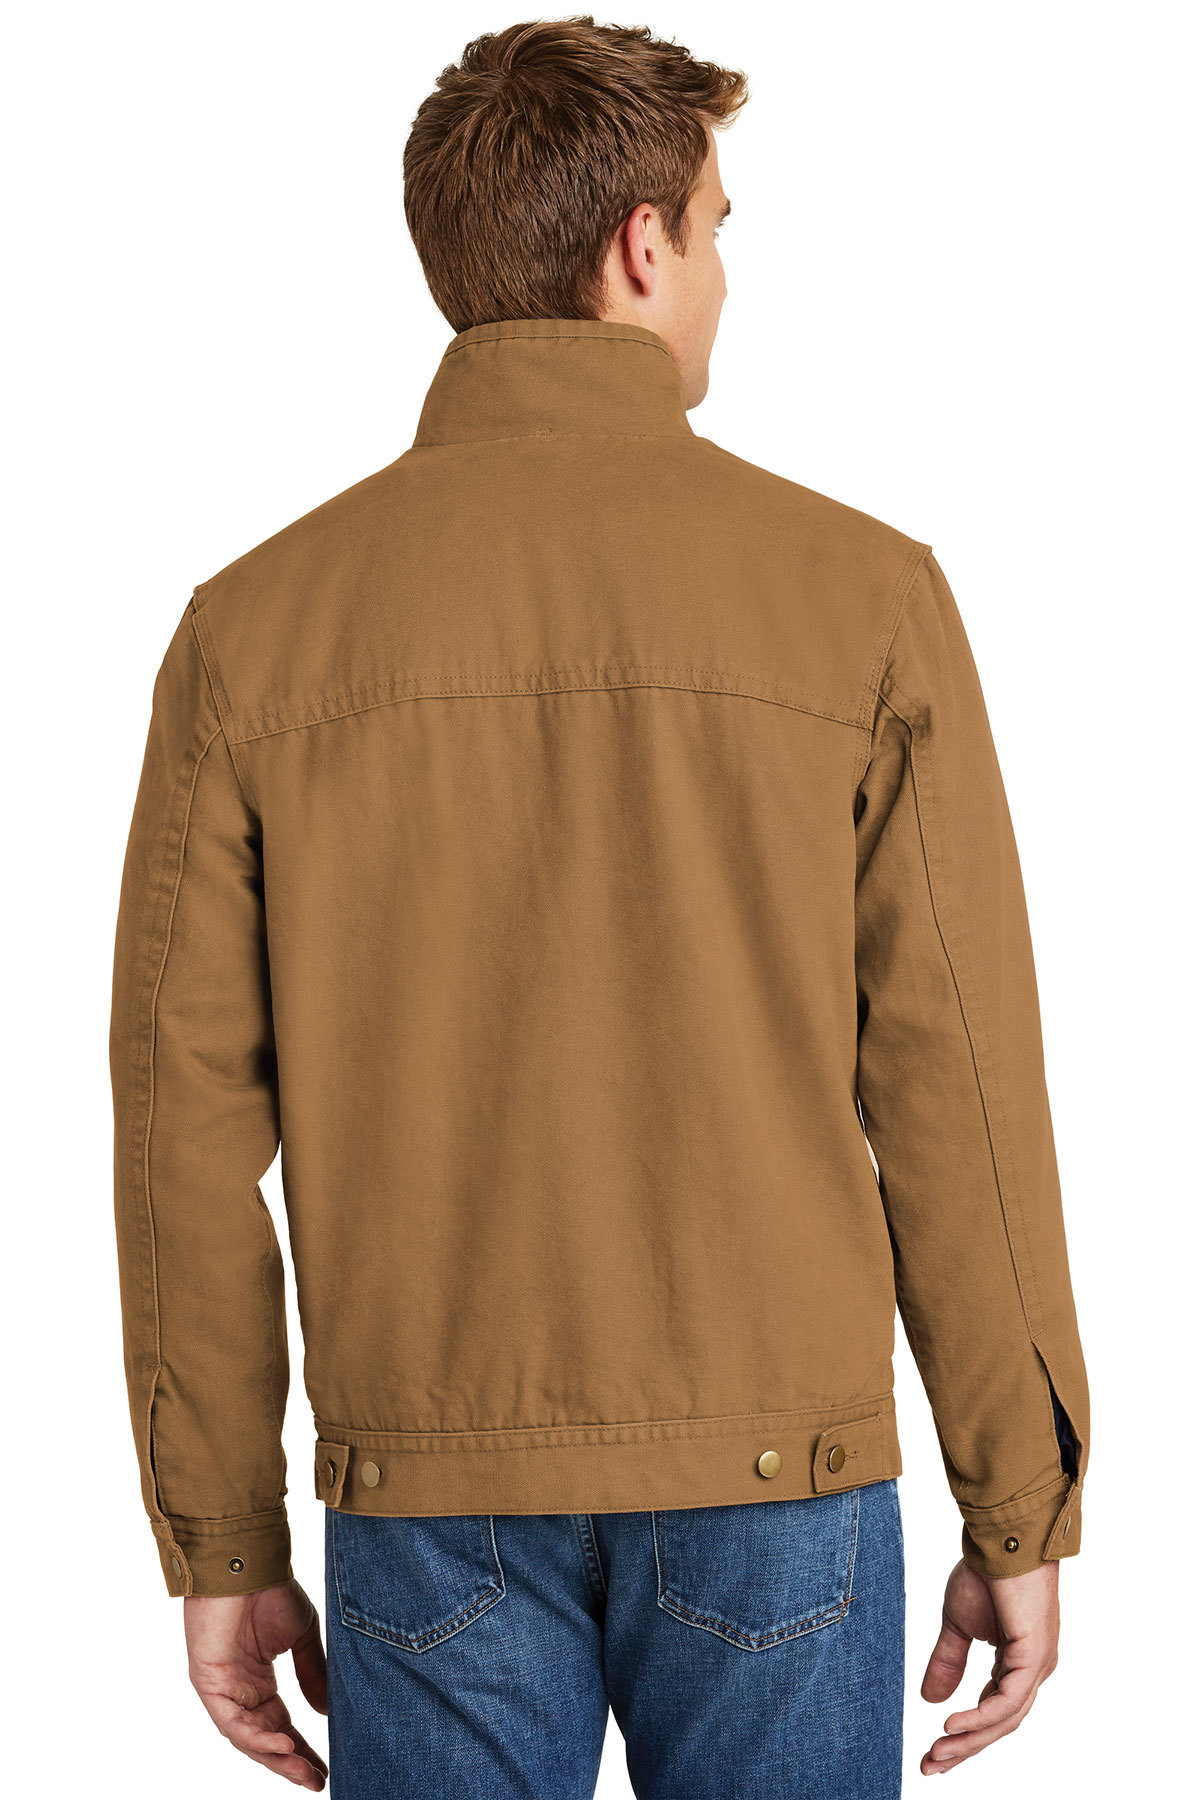 CornerStone Washed Duck Cloth Flannel-Lined Work Jacket | Product 